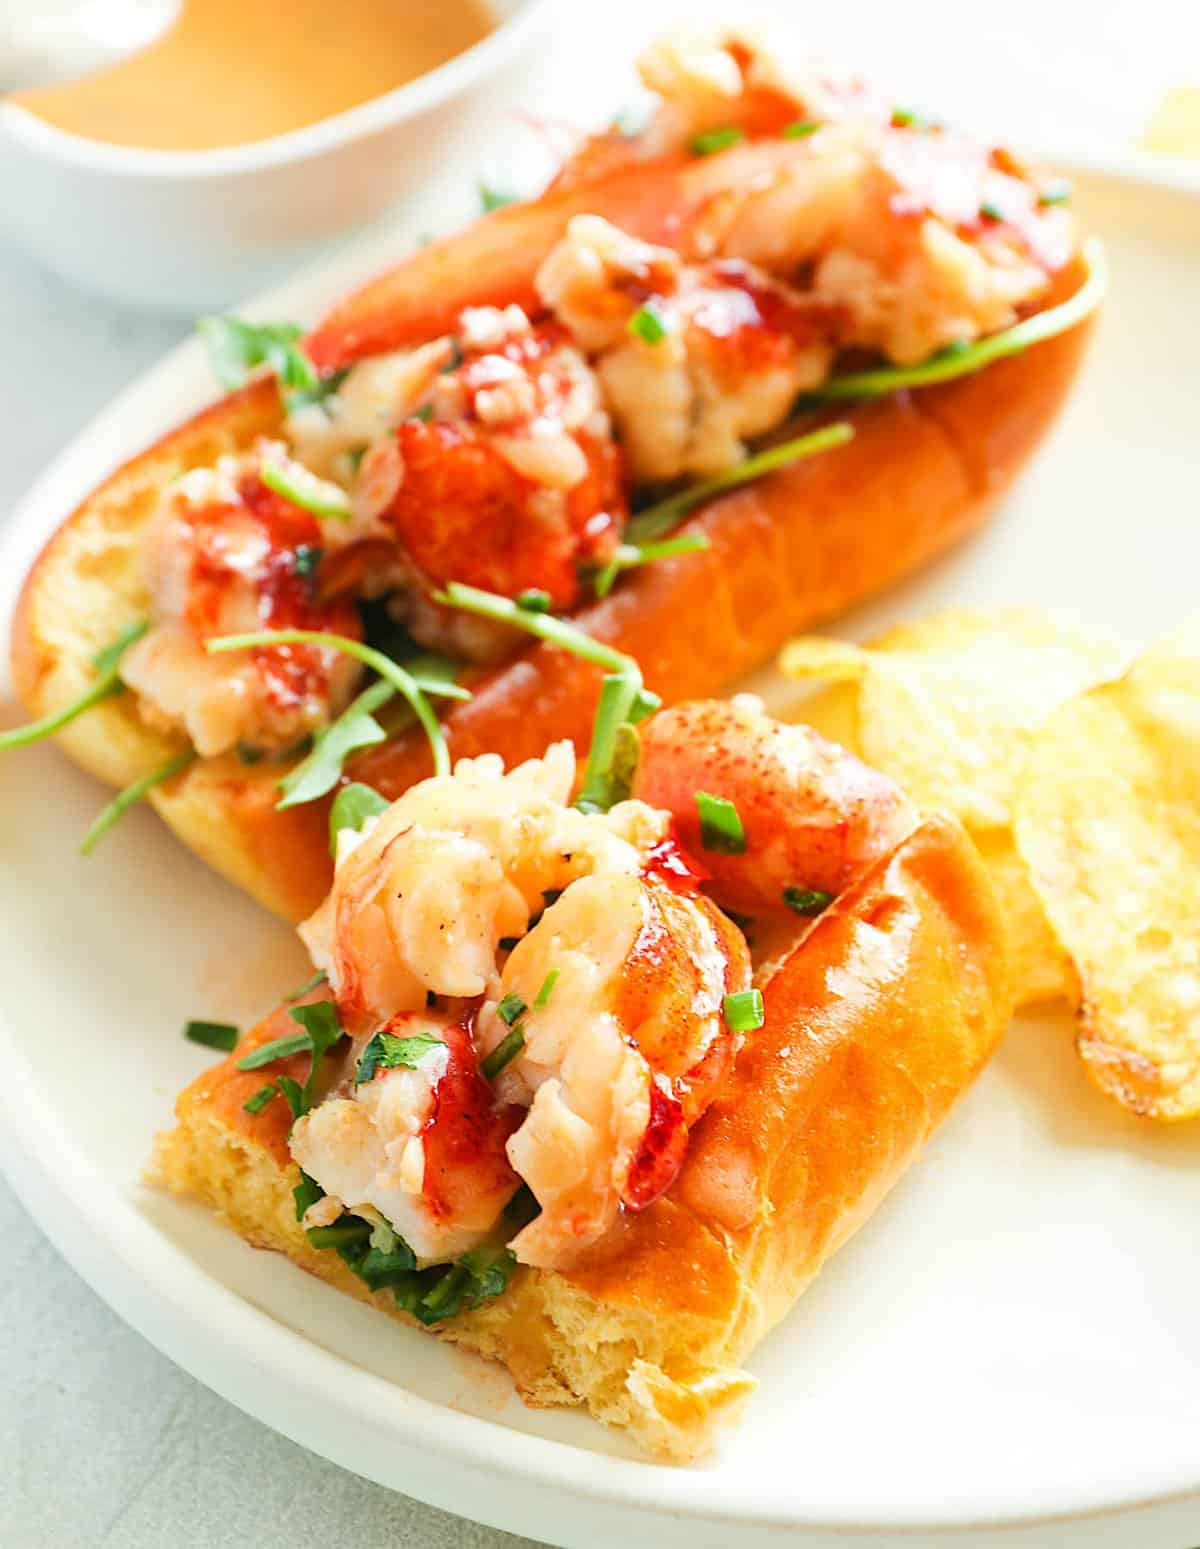 Reveling in a delicious Connecticut Lobster Rolls  for a special treat